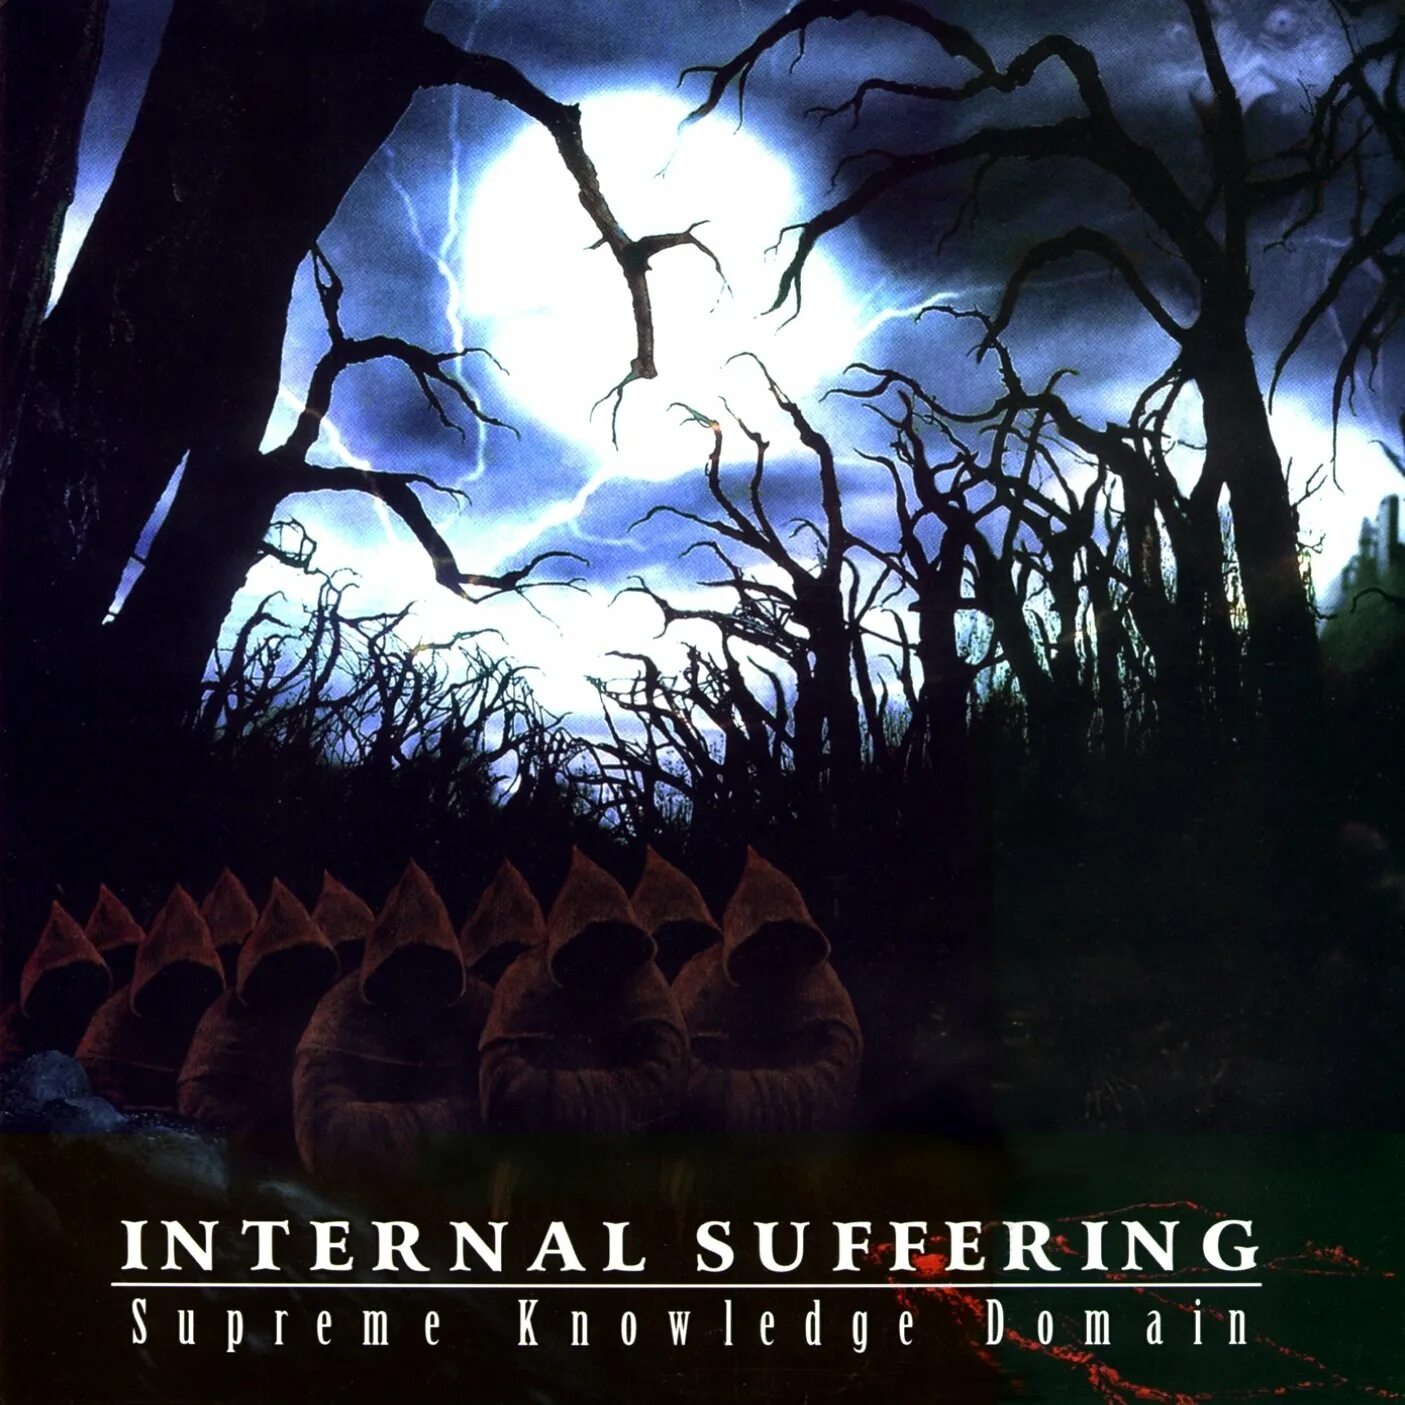 Unknown internal. Internal suffering. Internal suffering - Choronzonic Force domination. Last Days of Humanity horrific Compositions of decomposition.